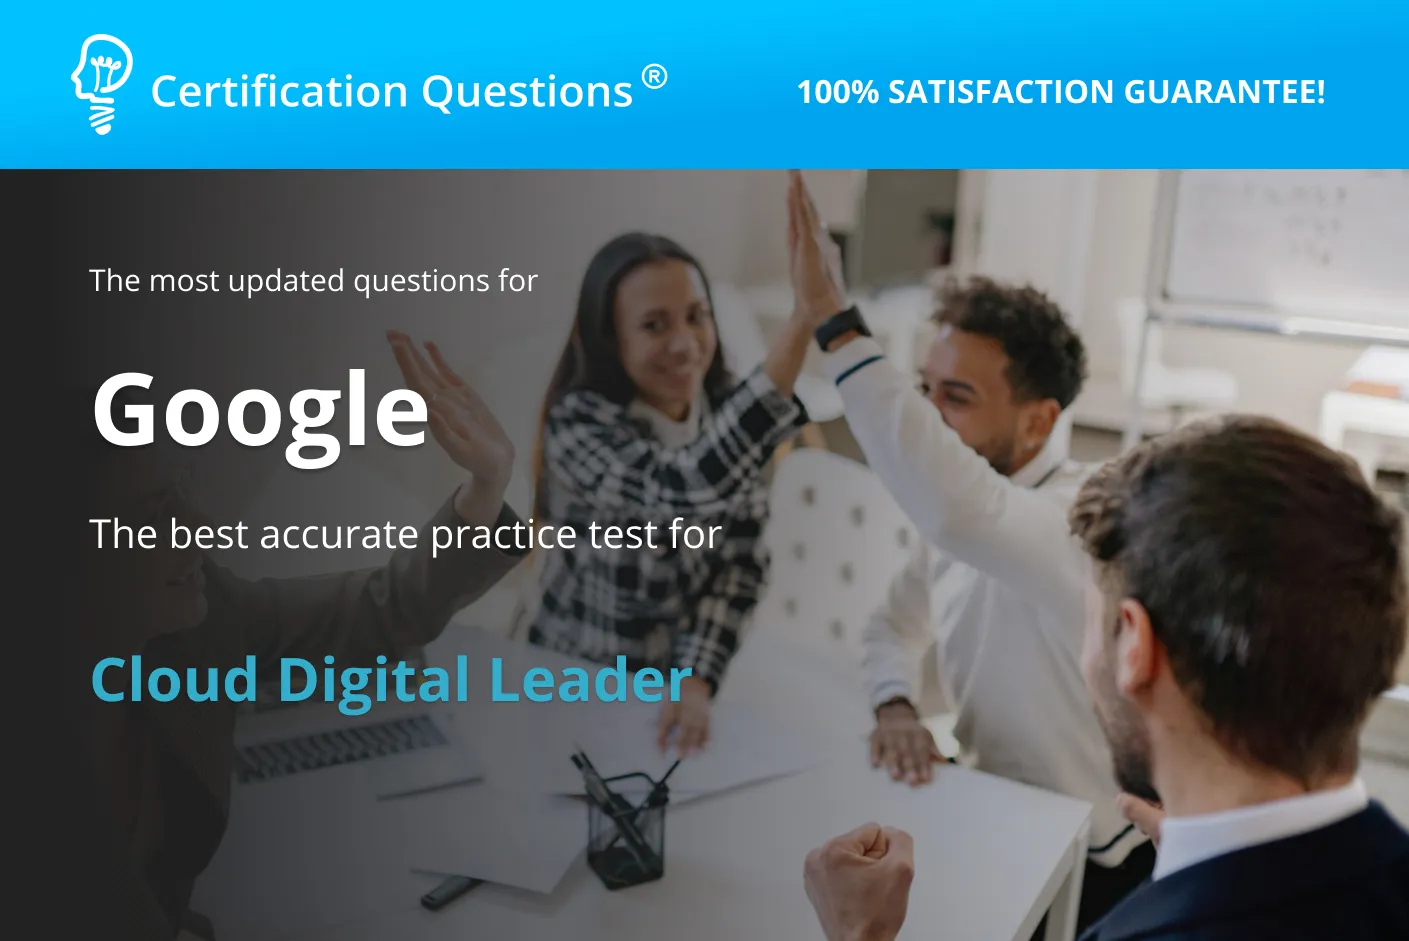 This image is related to google cloud digital leader exam questions